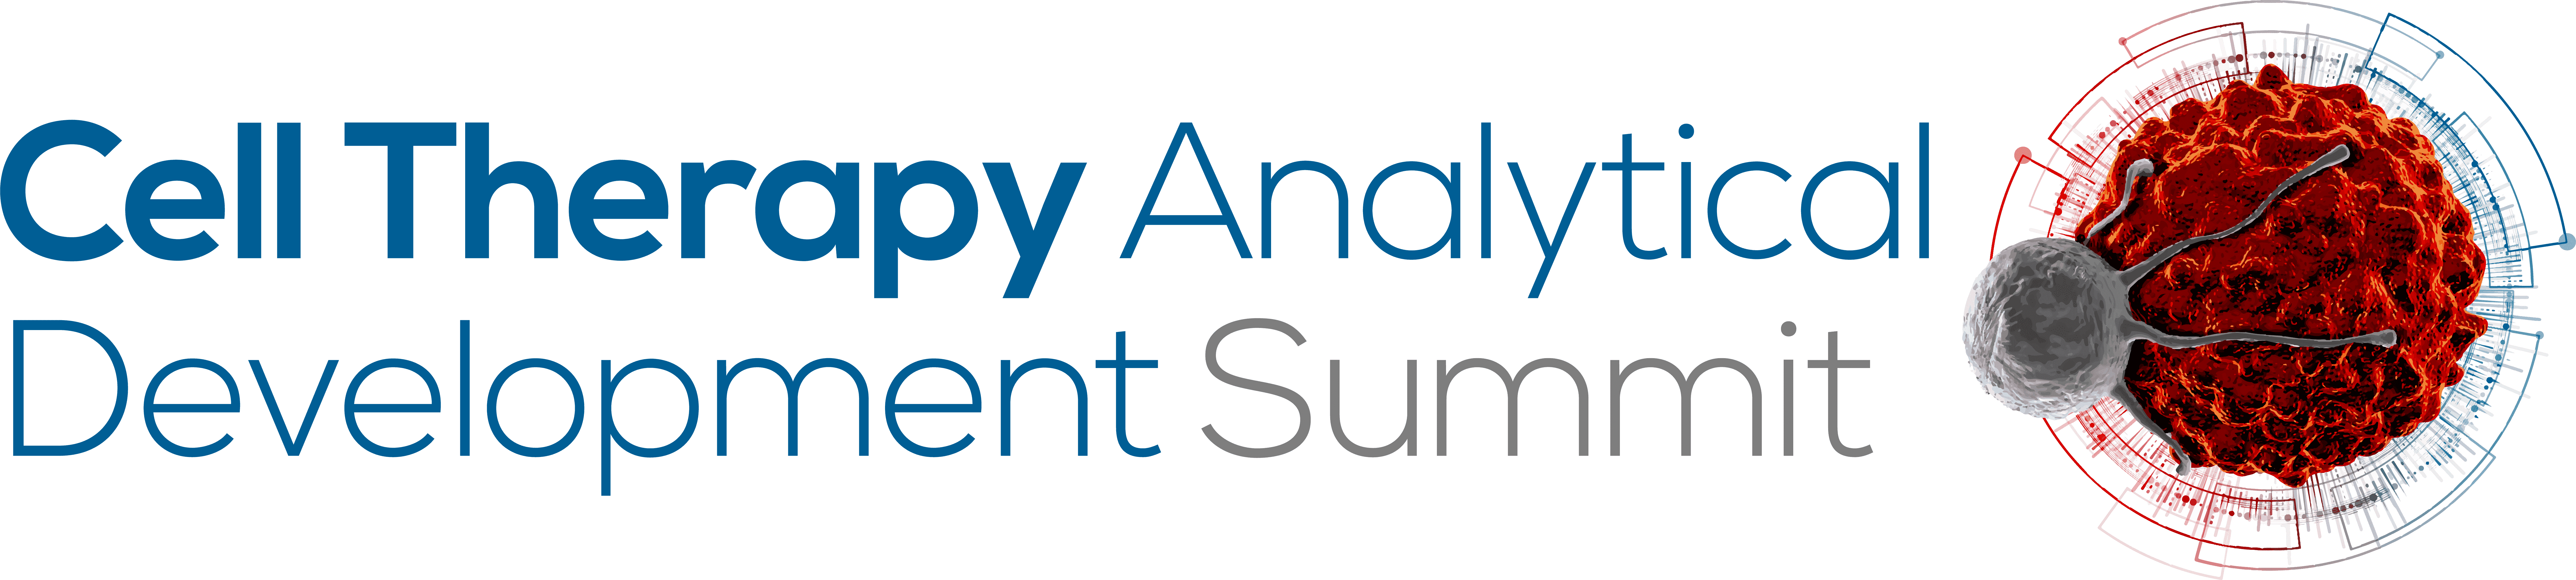 25544 Cell Therapy Analytical Development Summit logo (5)